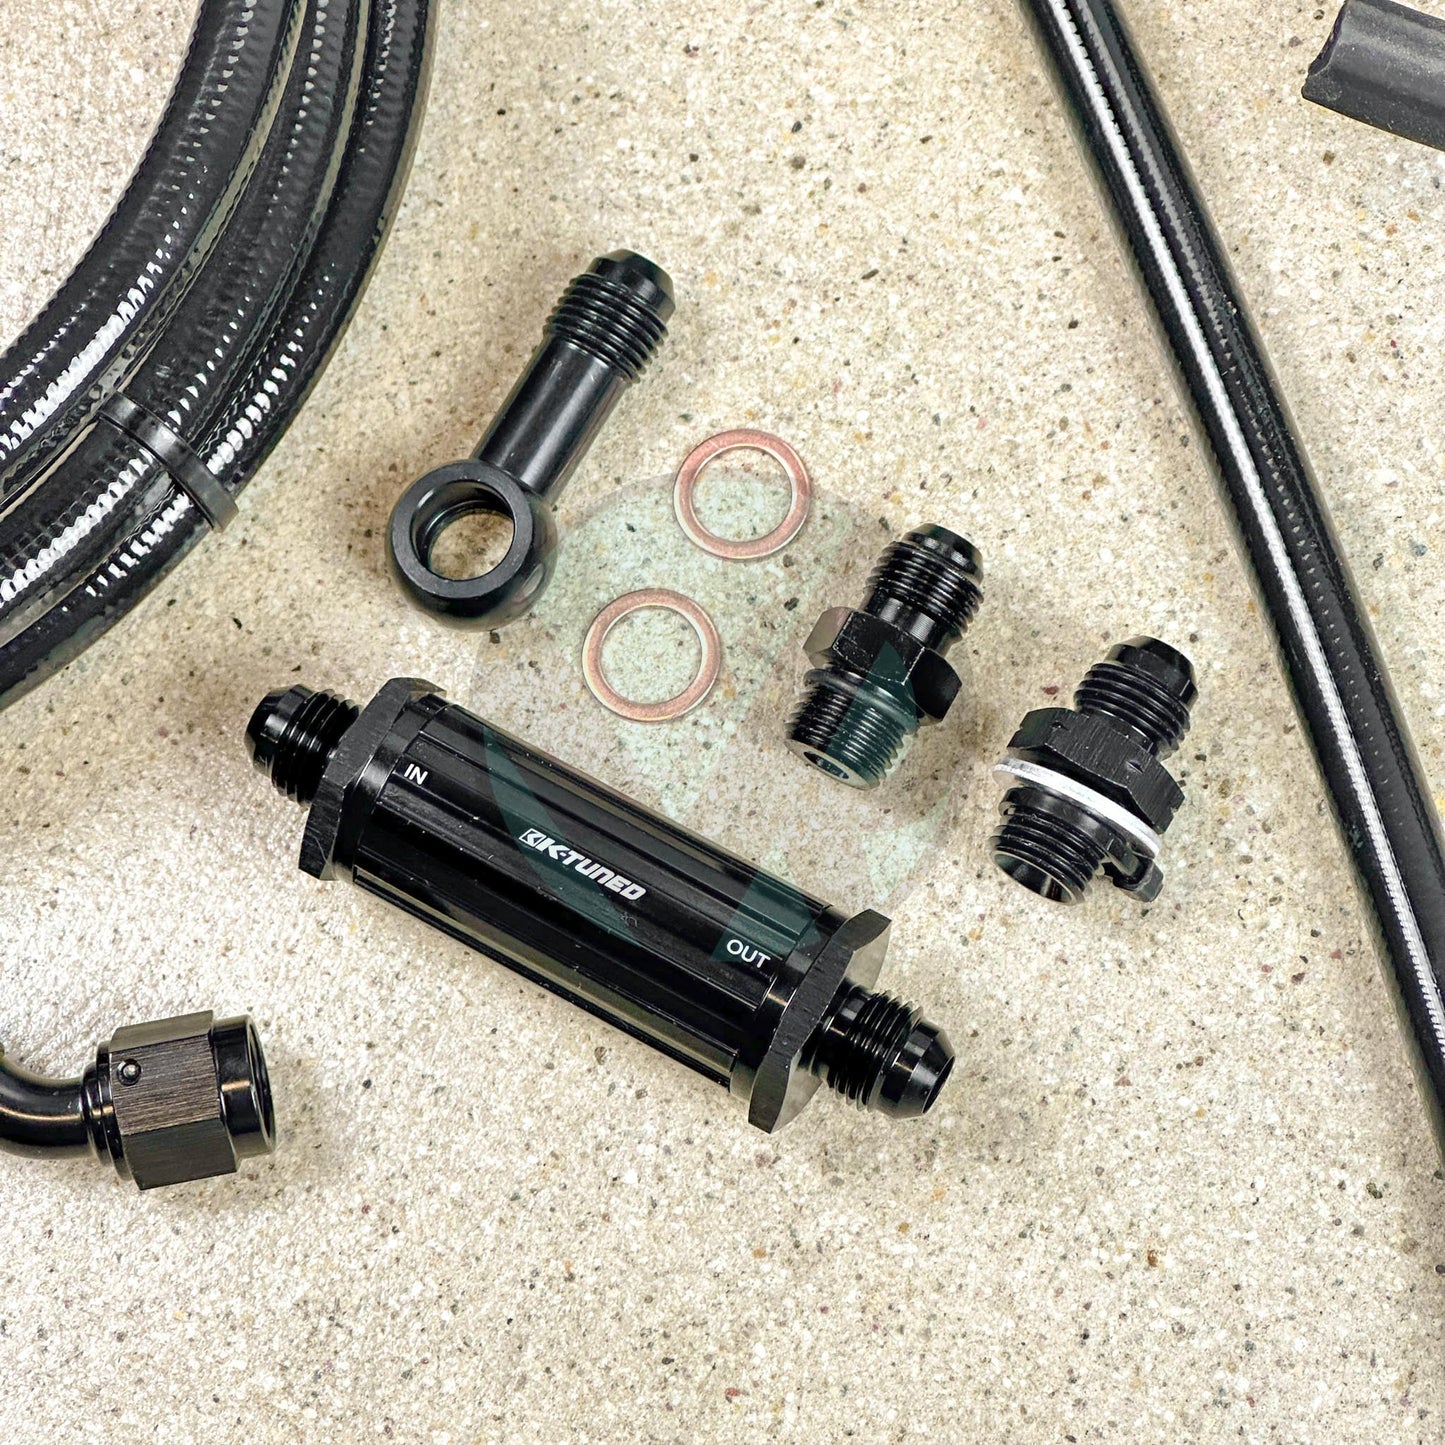 92-95 Civic 2dr Coupe Tucked Stainless Steel Complete Fuel Line System K-Tuned Fileter -6 Black